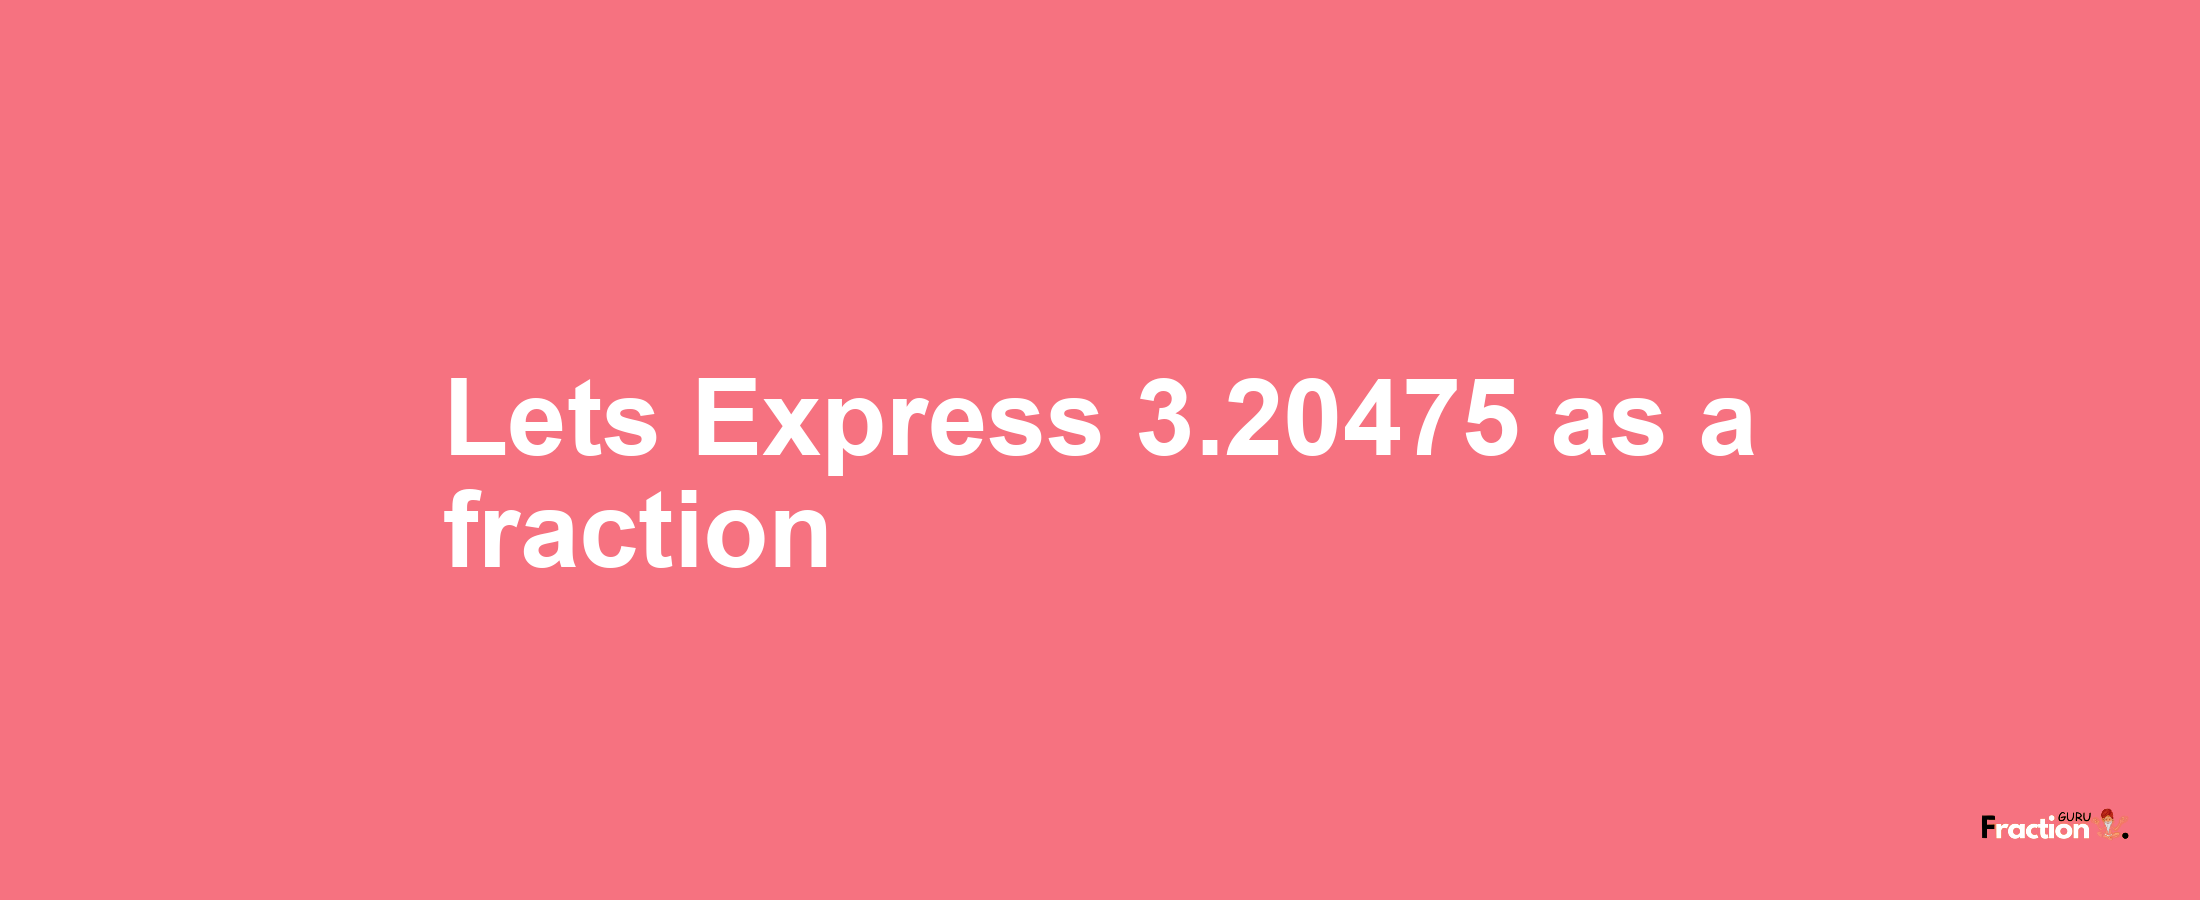 Lets Express 3.20475 as afraction